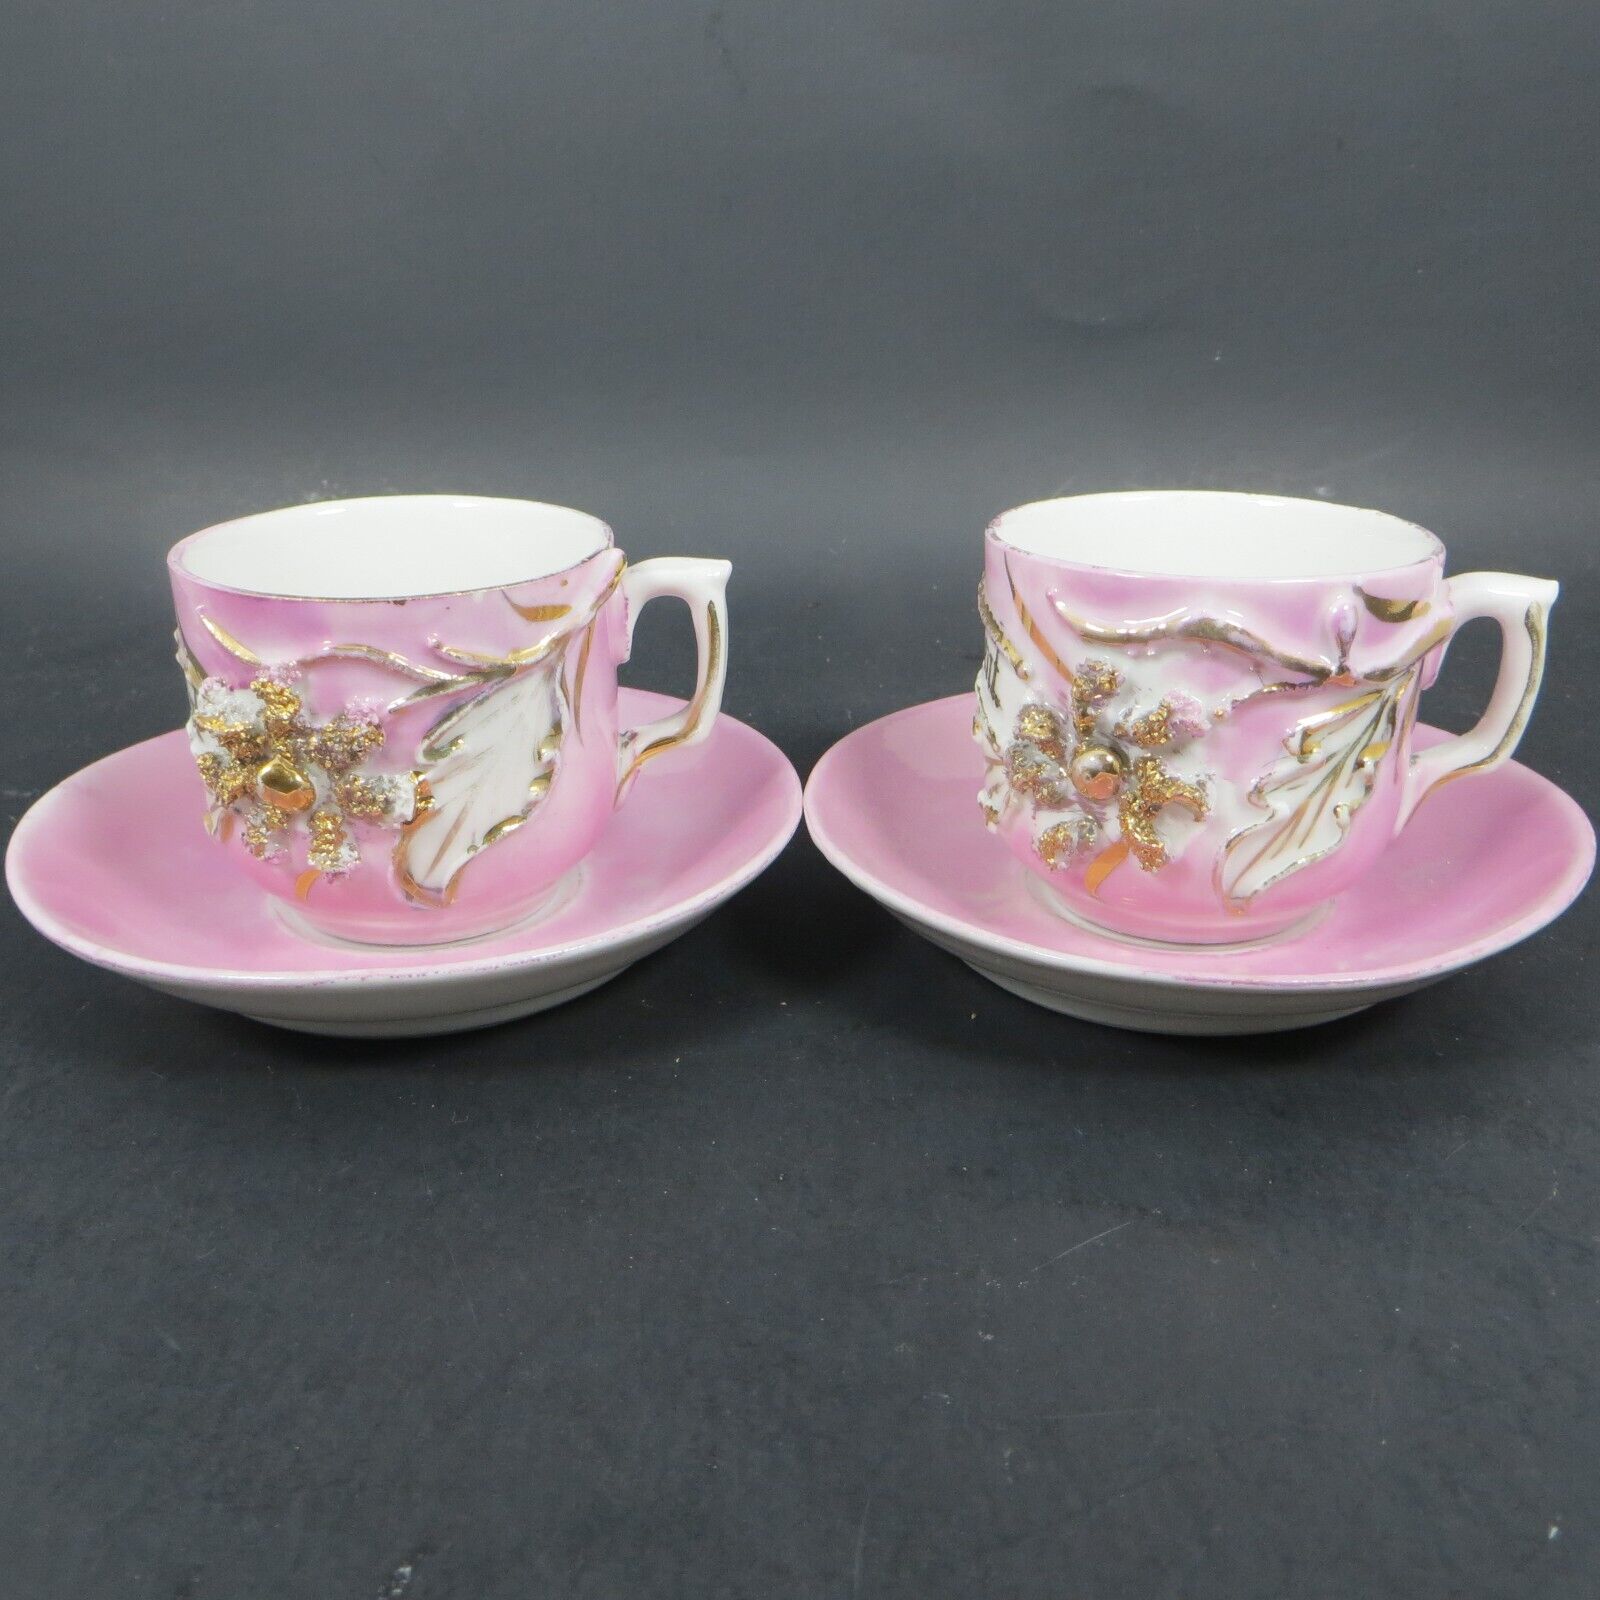 Set Of 2 Antique German Teacup and Saucer Lusterware Pink and Gold Flower Raised